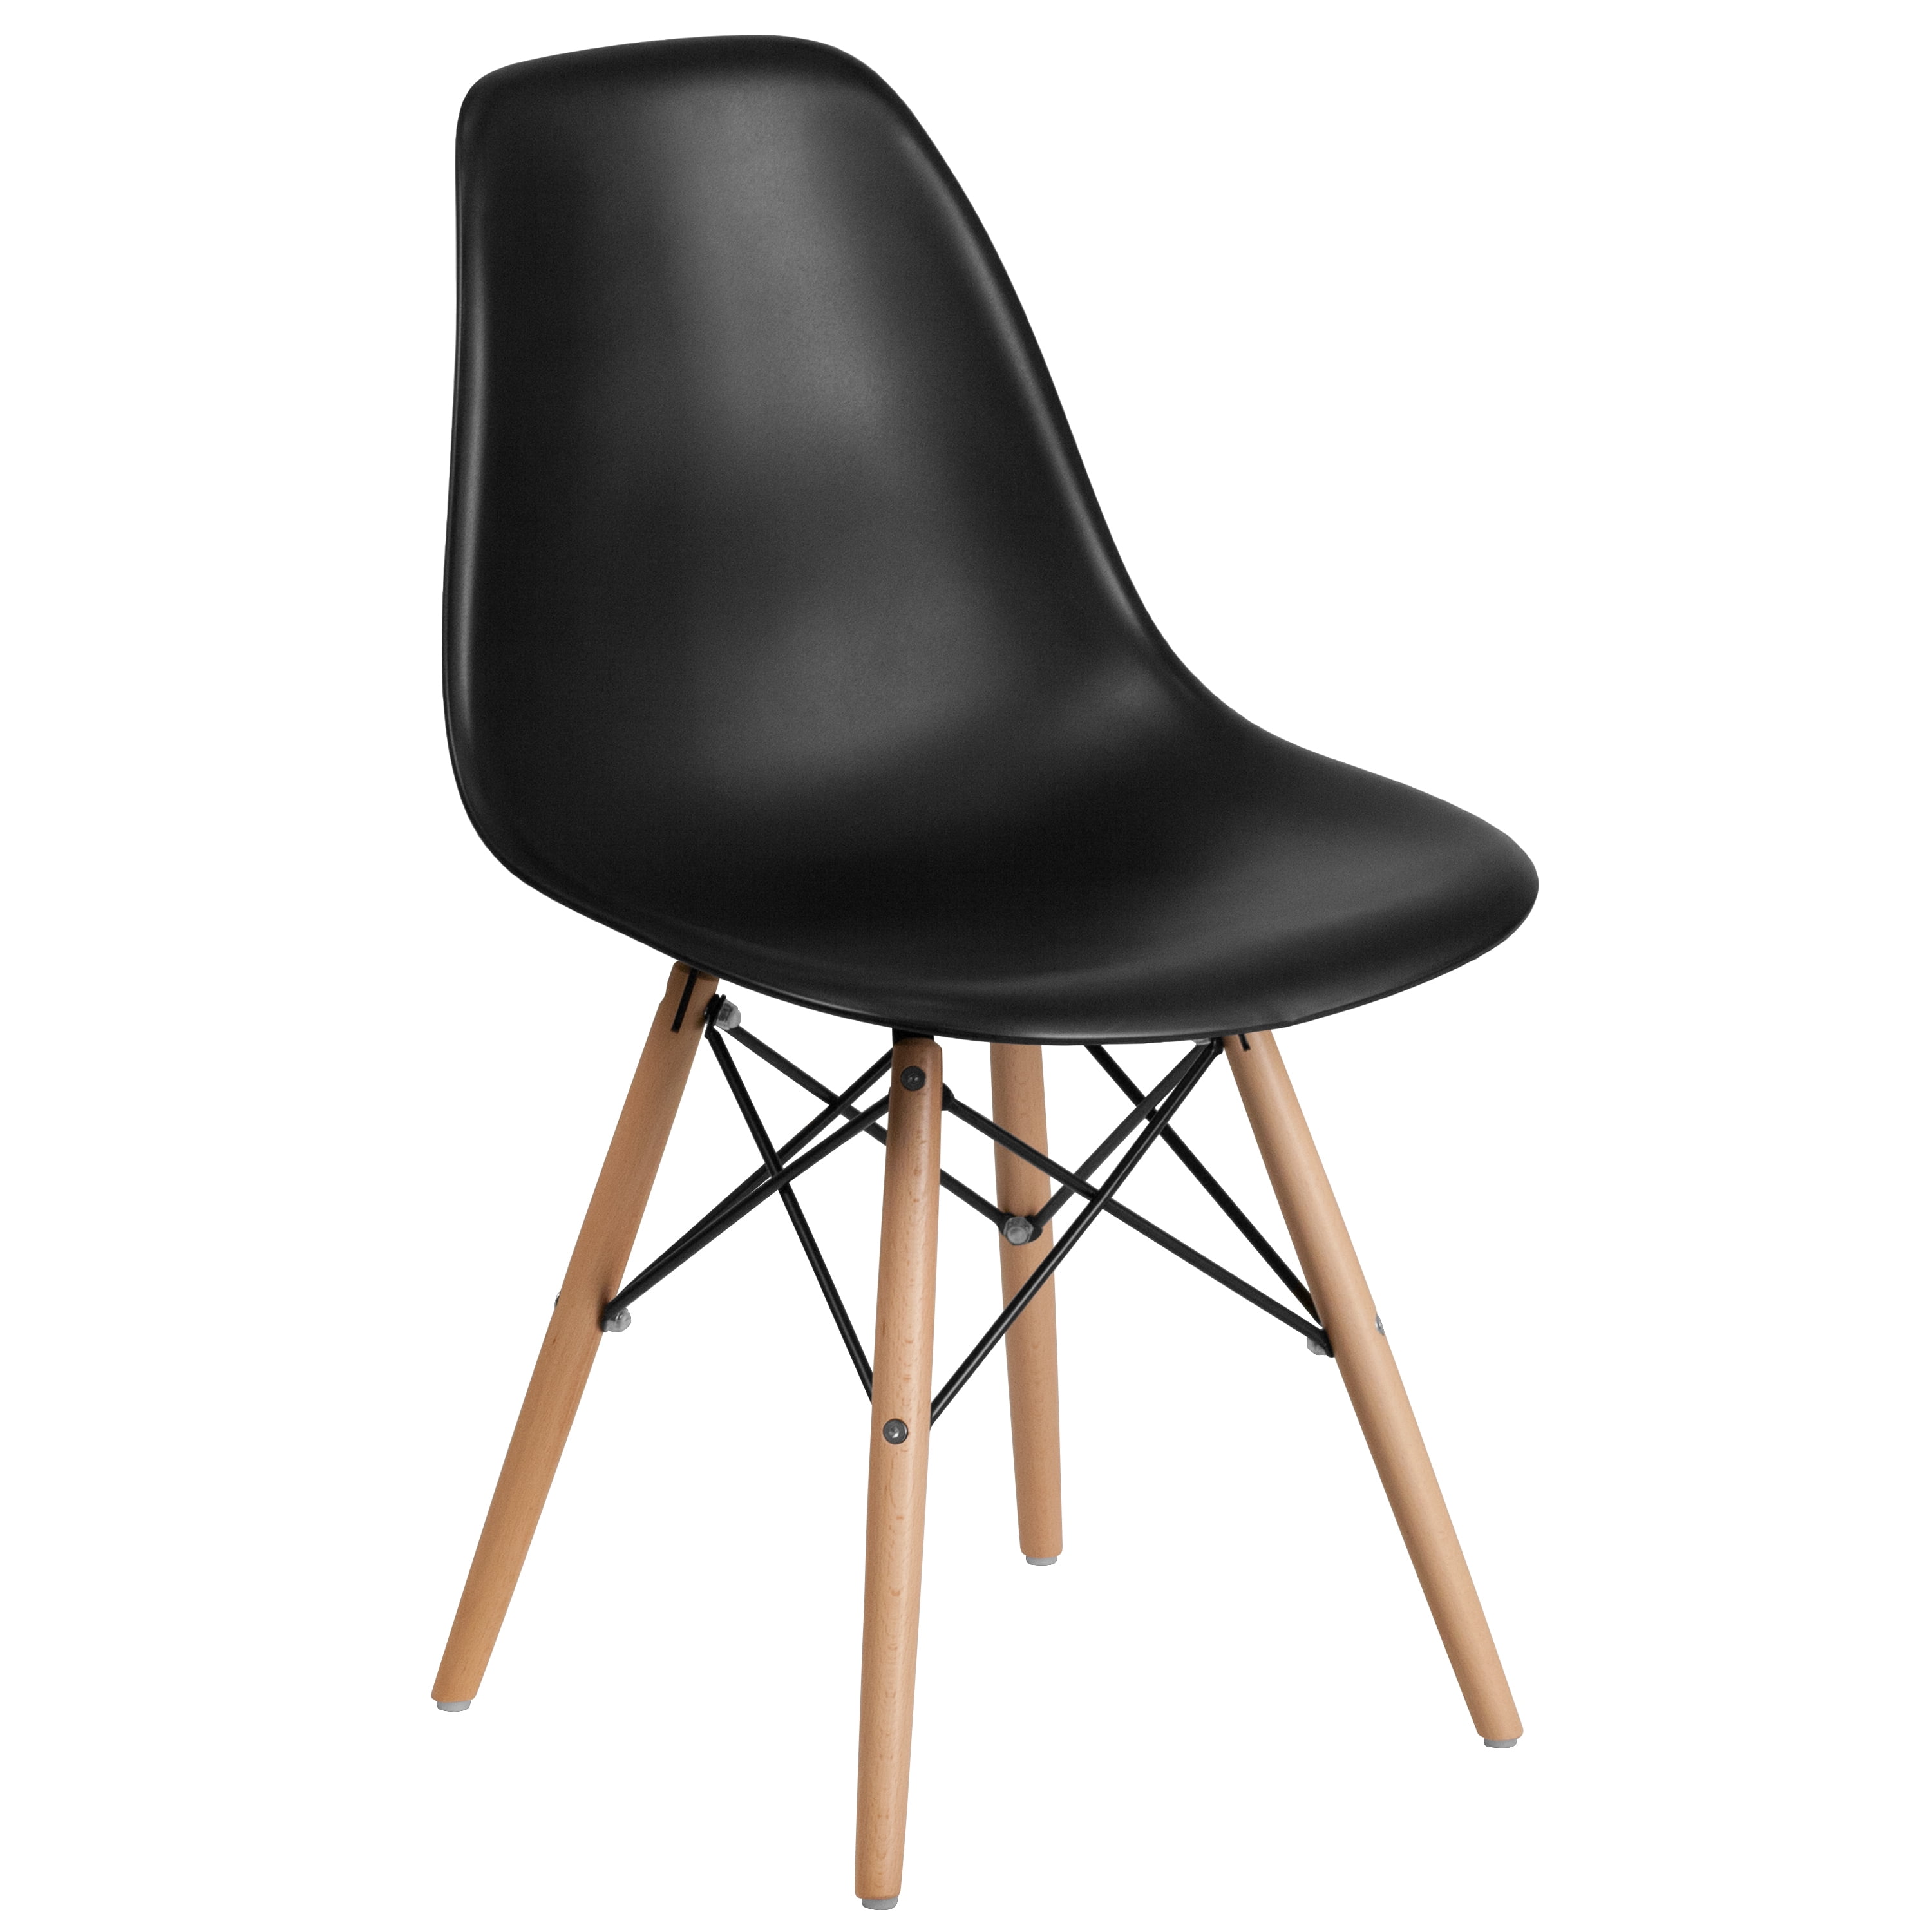 Black Plastic Chair With Wooden Legs, Black Plastic Chair With Wood Legs